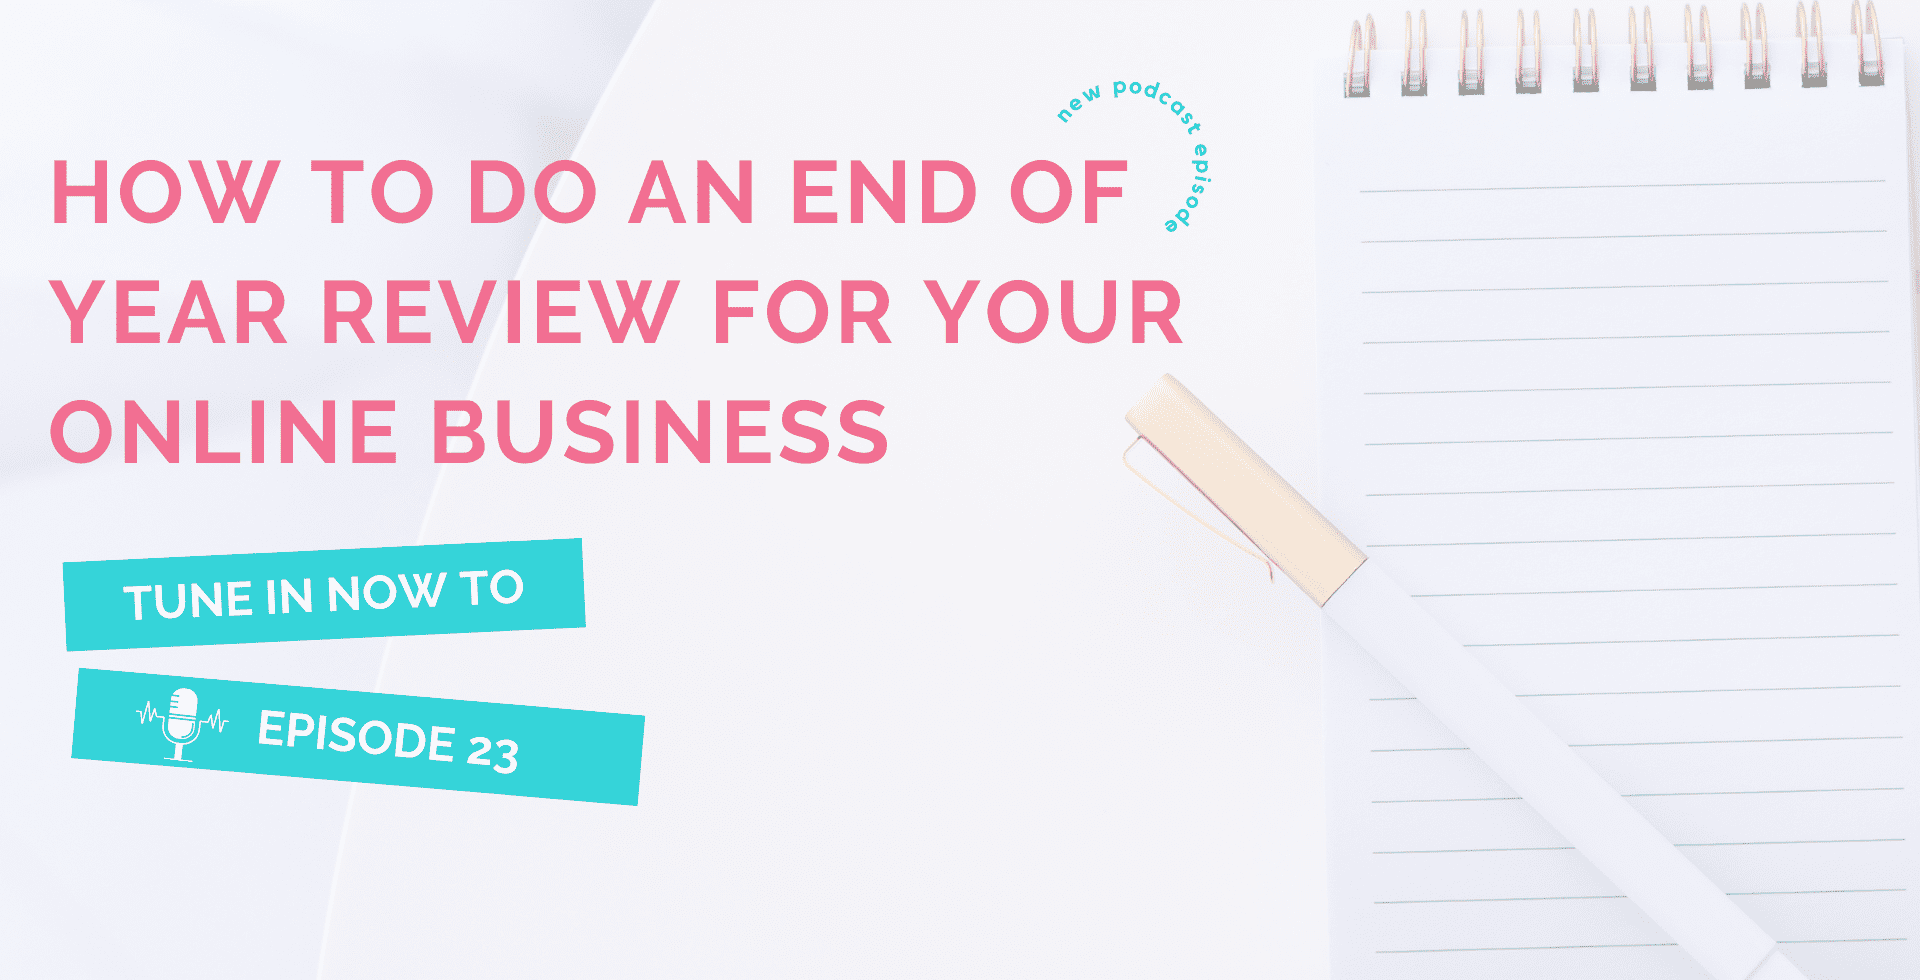 How To Do an End of Year Review for Your Online Business